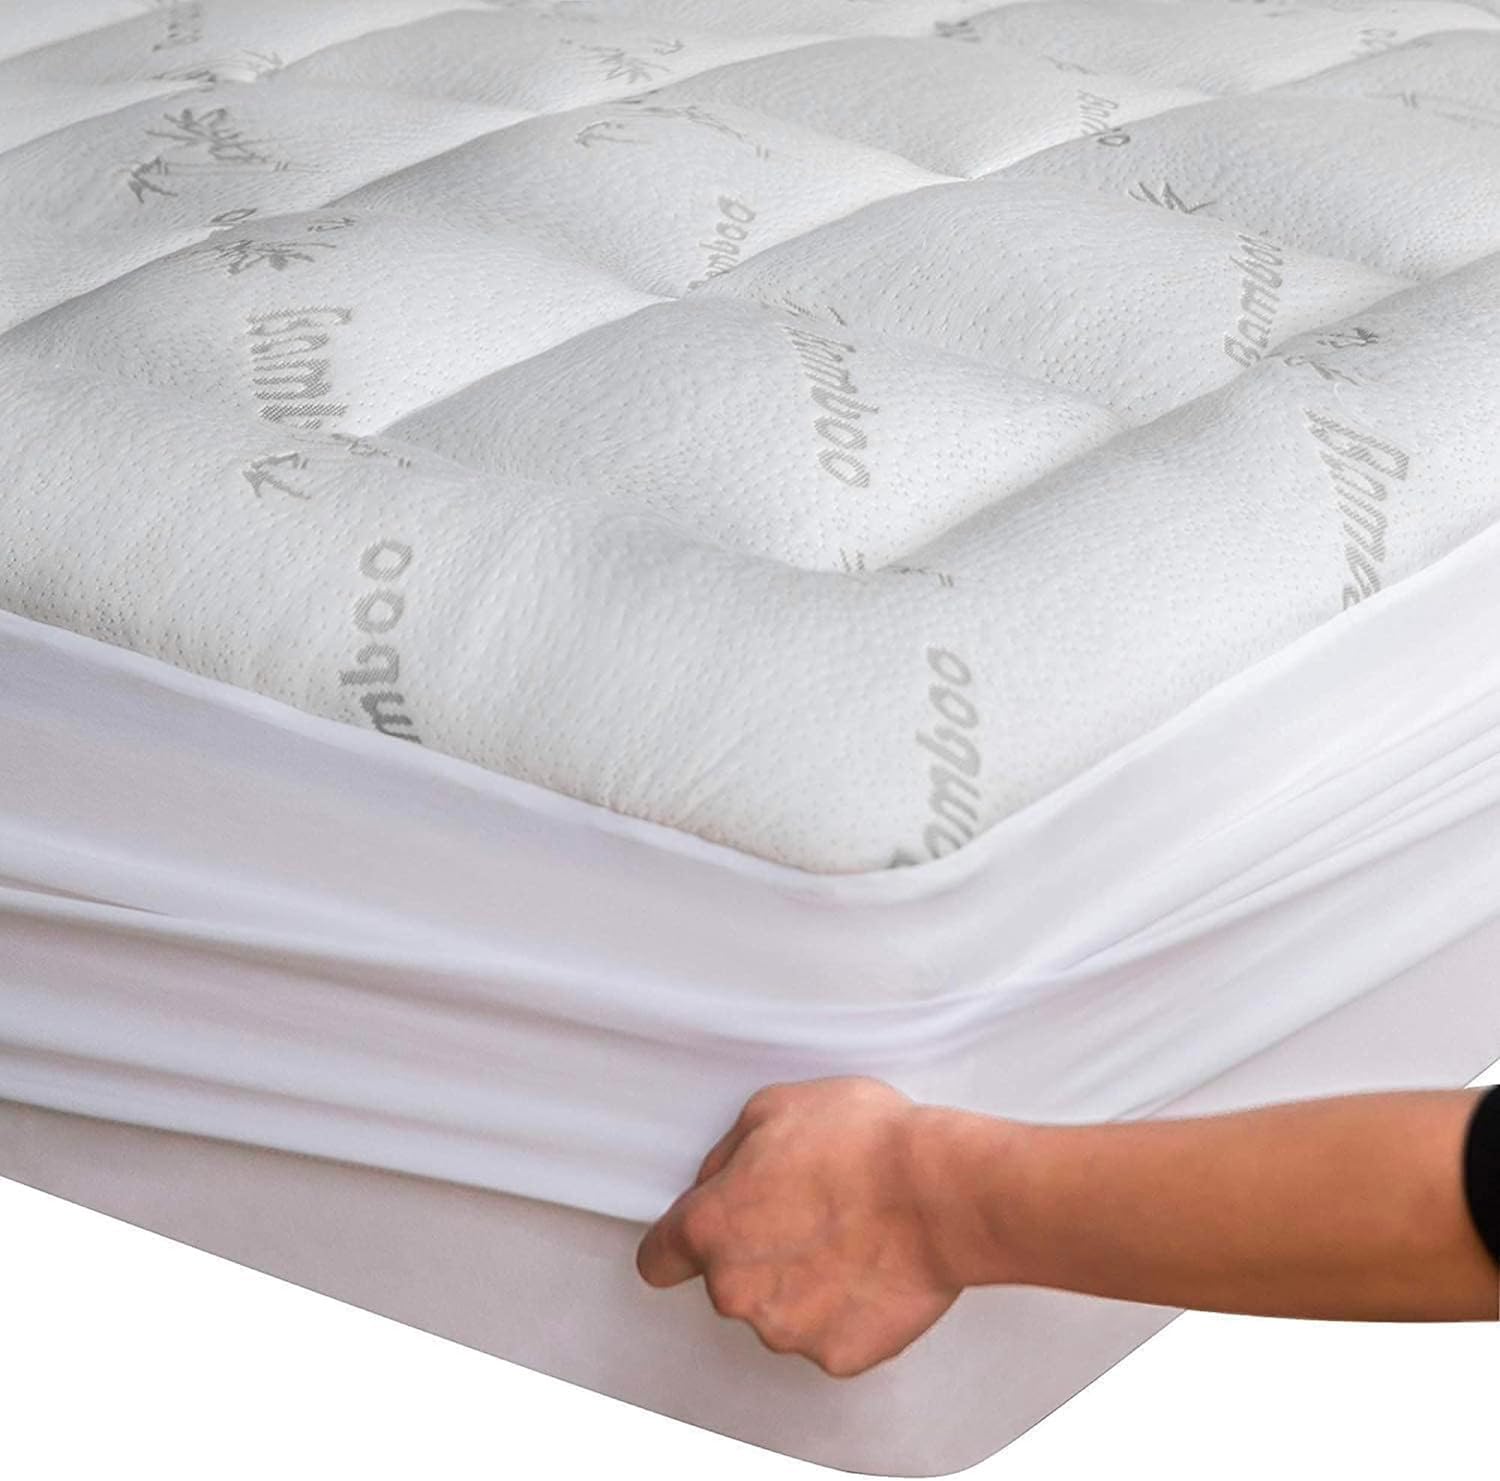 Bamboo Twin Extra Long XL Mattress Topper - Thick Cooling Breathable Pillow Top Mattress Pad for Back Pain Relief - Deep Pocket Topper Fits 8-20 Inches (Viscose Made from Bamboo, 39x80 Inches, White)